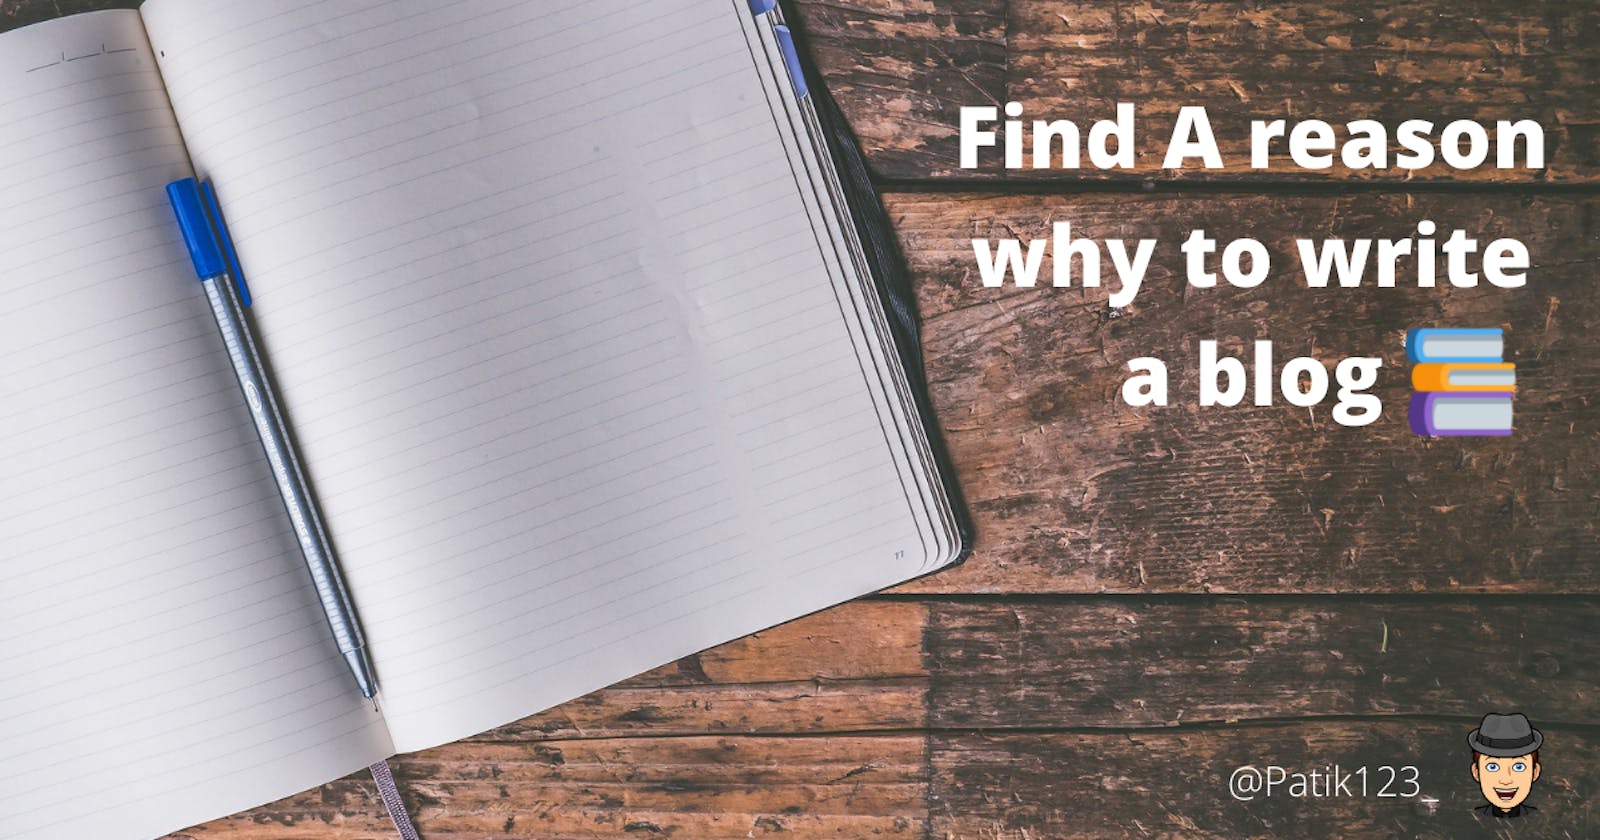 Find A reason why to write a blog📚